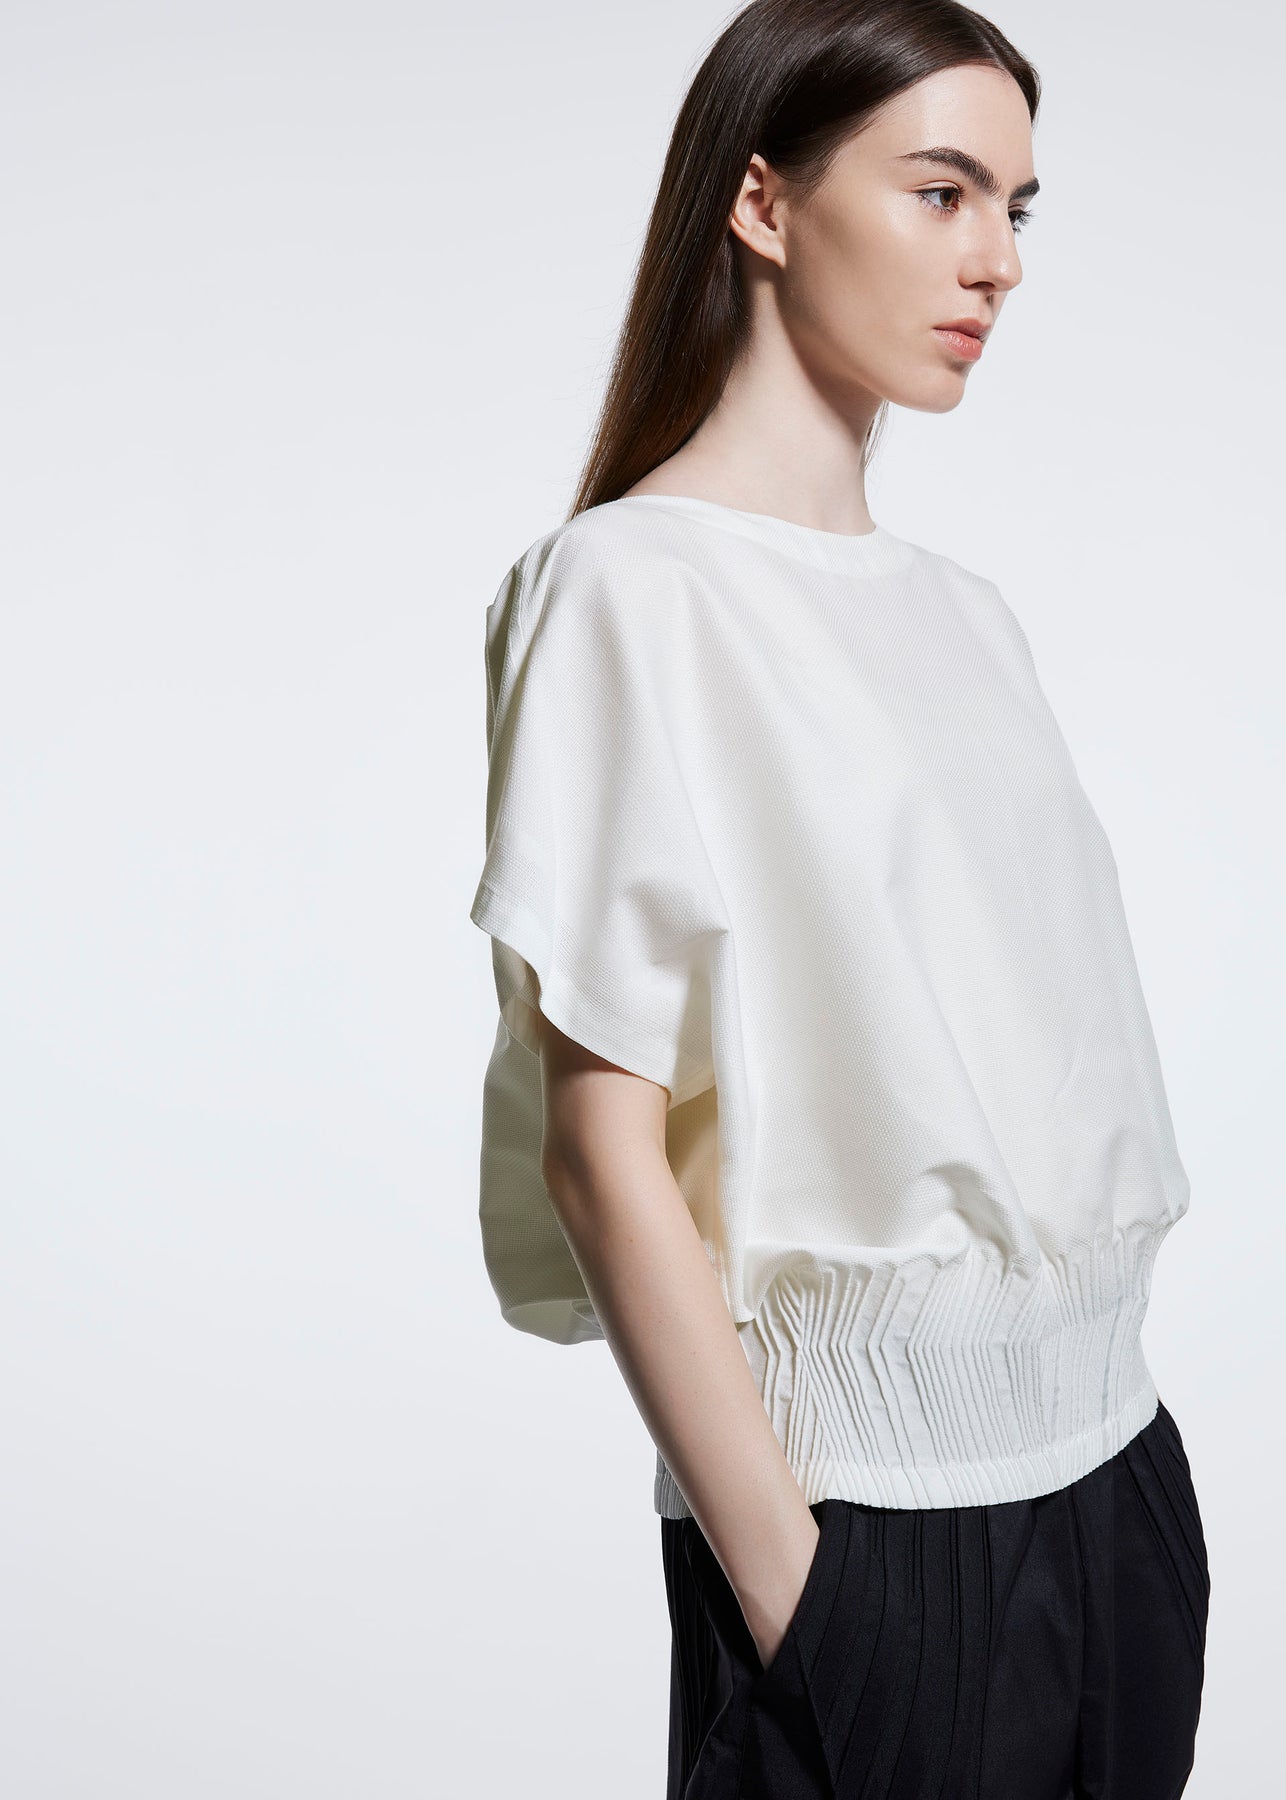 TYPE-W 006 SHIRT | The official ISSEY MIYAKE ONLINE STORE | ISSEY 